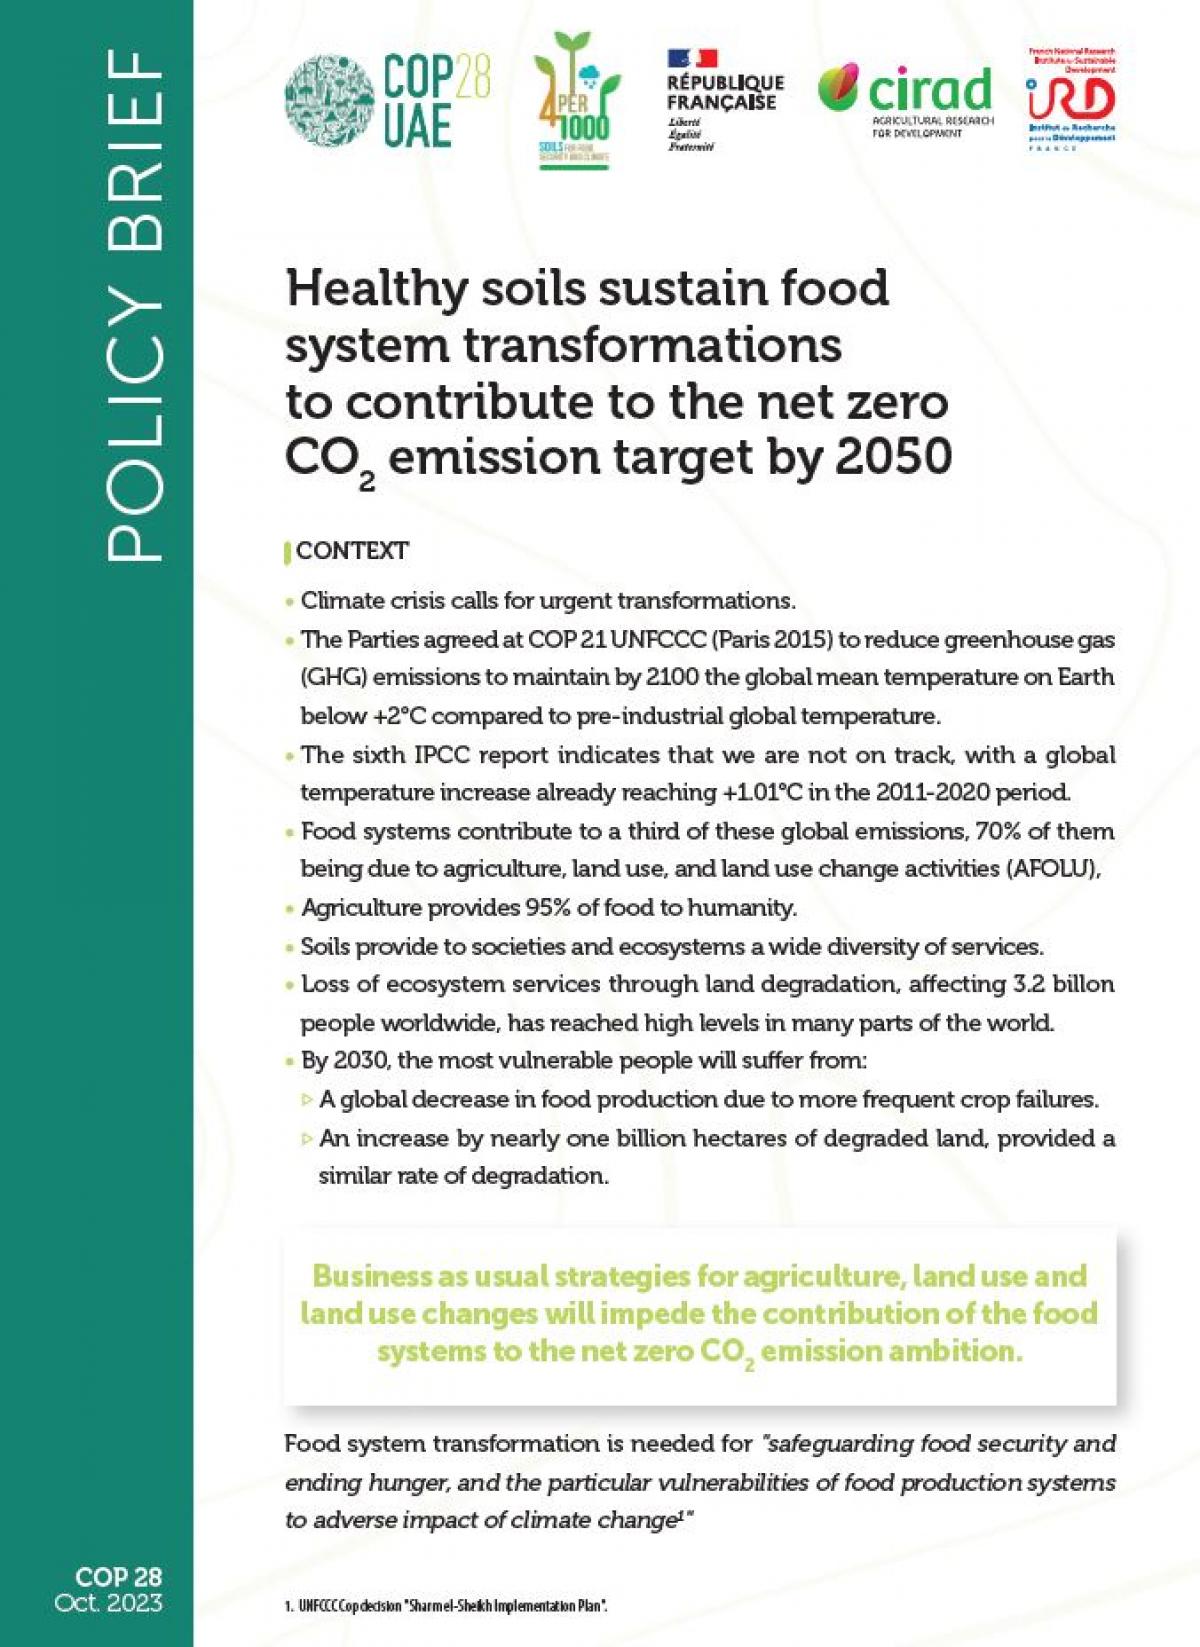 Healthy soils sustain food system transformations to contribute to the net zero CO2 emission target by 2050